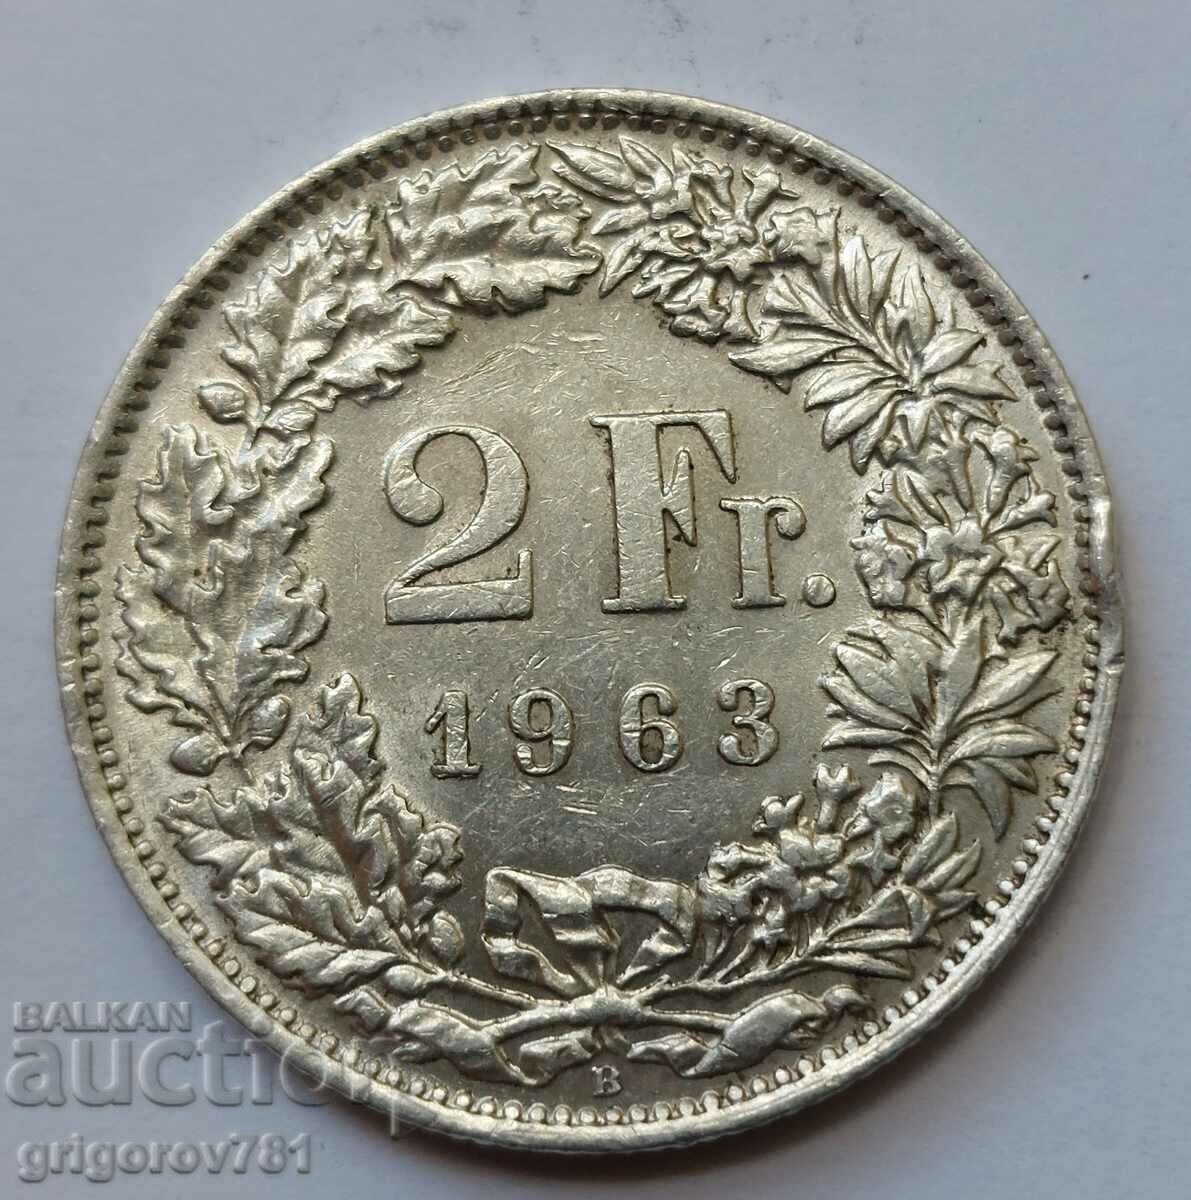 2 Francs Silver Switzerland 1963 B - Silver Coin #13